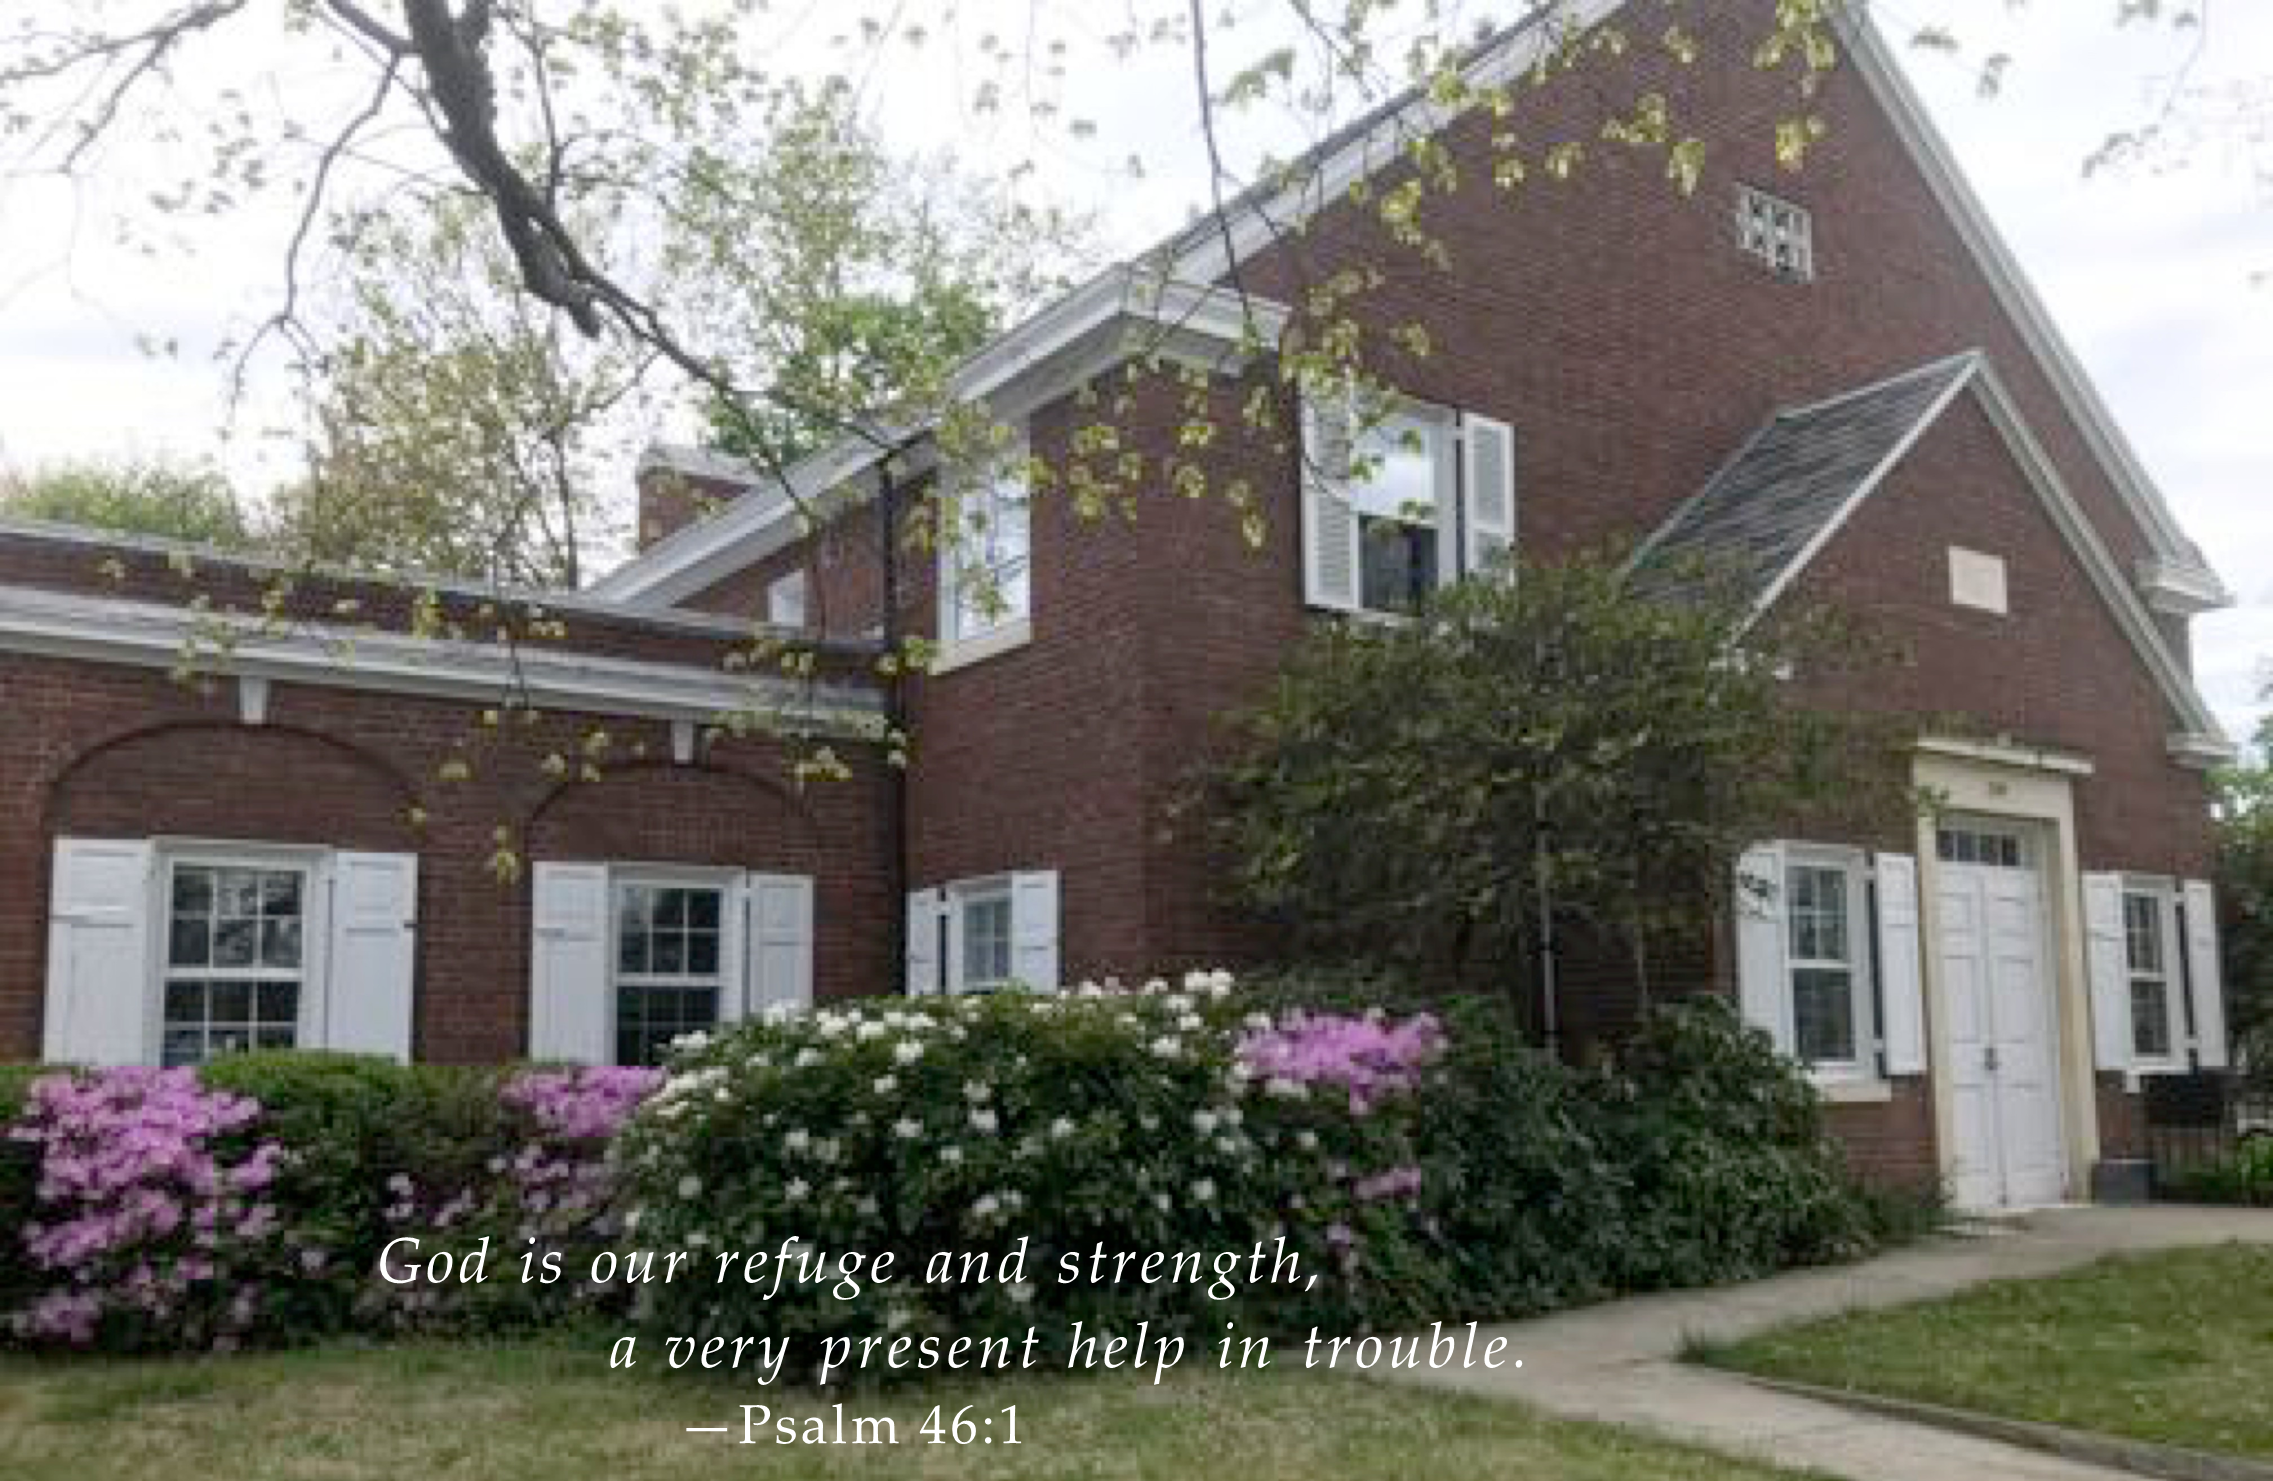 A quaint brick building with blooming bushes and a biblical verse, psalm 46:1, displayed on the front lawn.